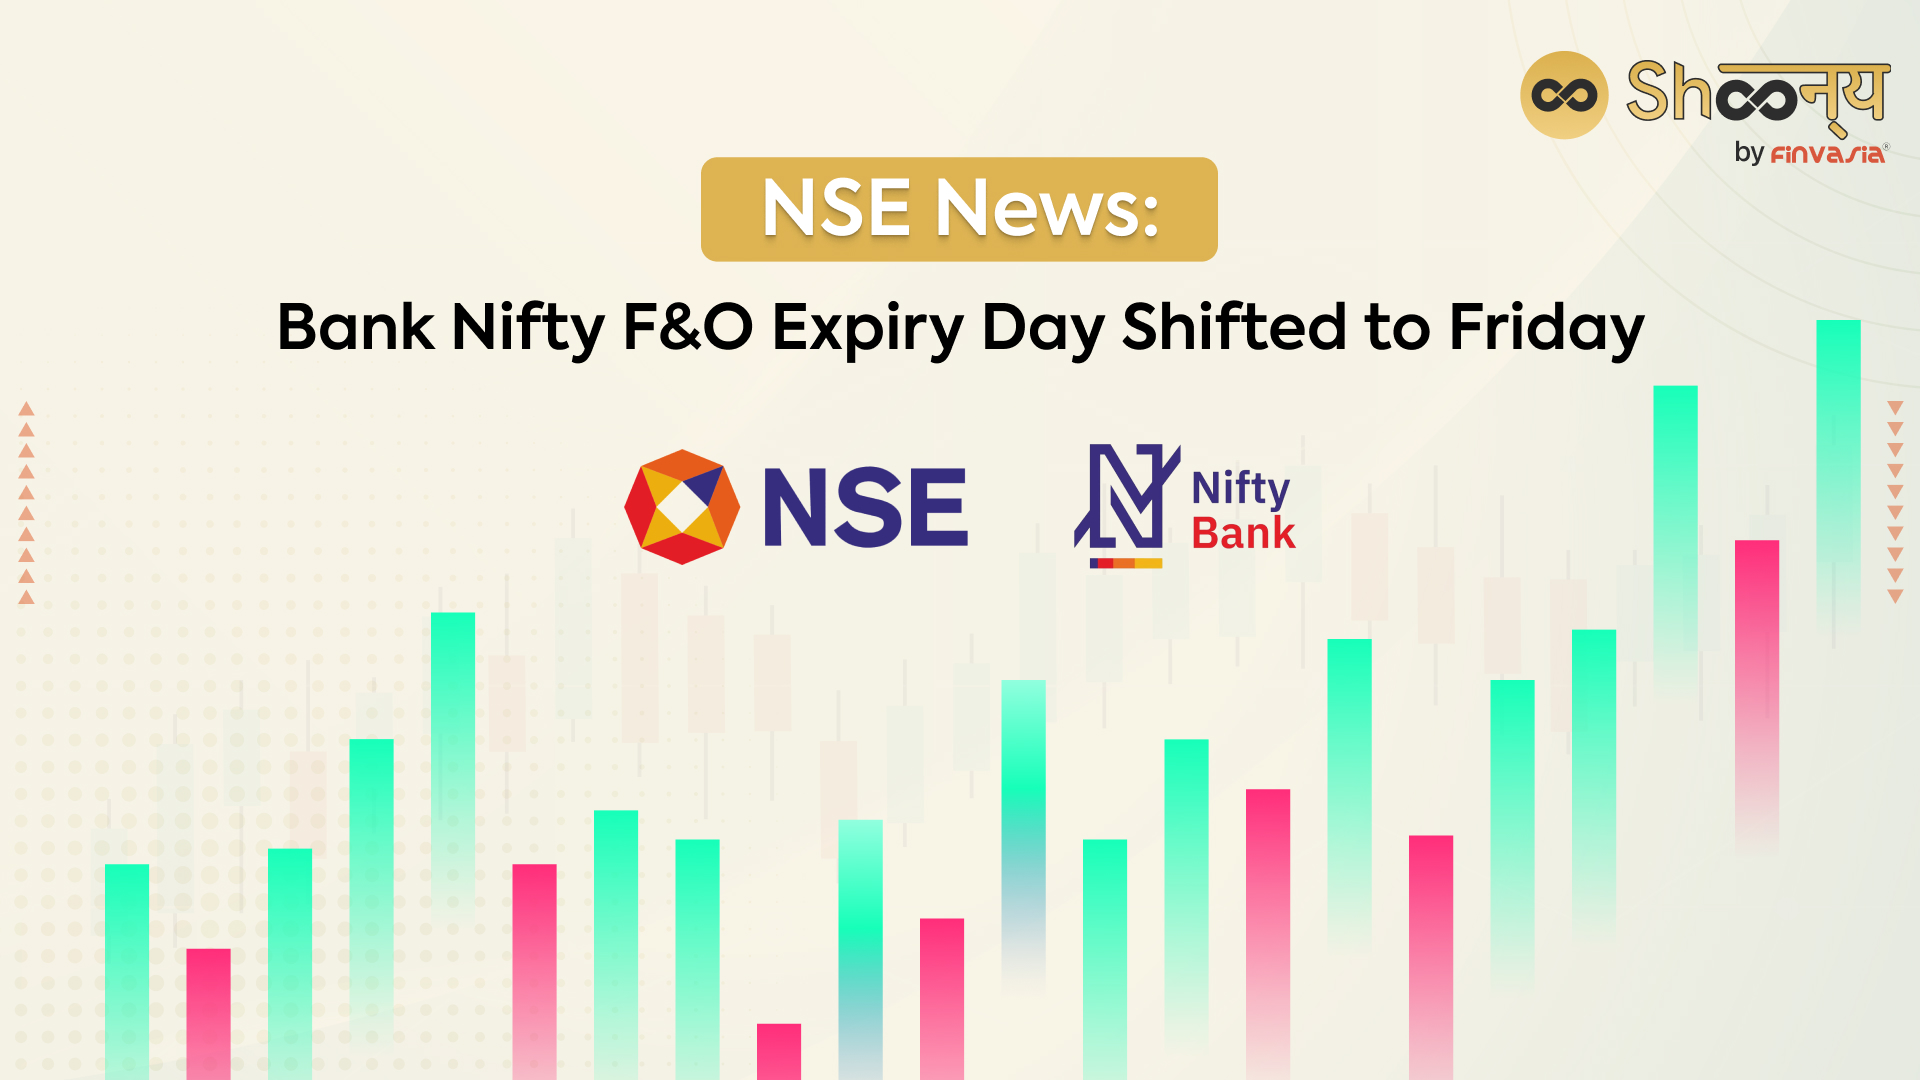 NSE News: Bank Nifty F&O Expiry Day Shifted to Friday